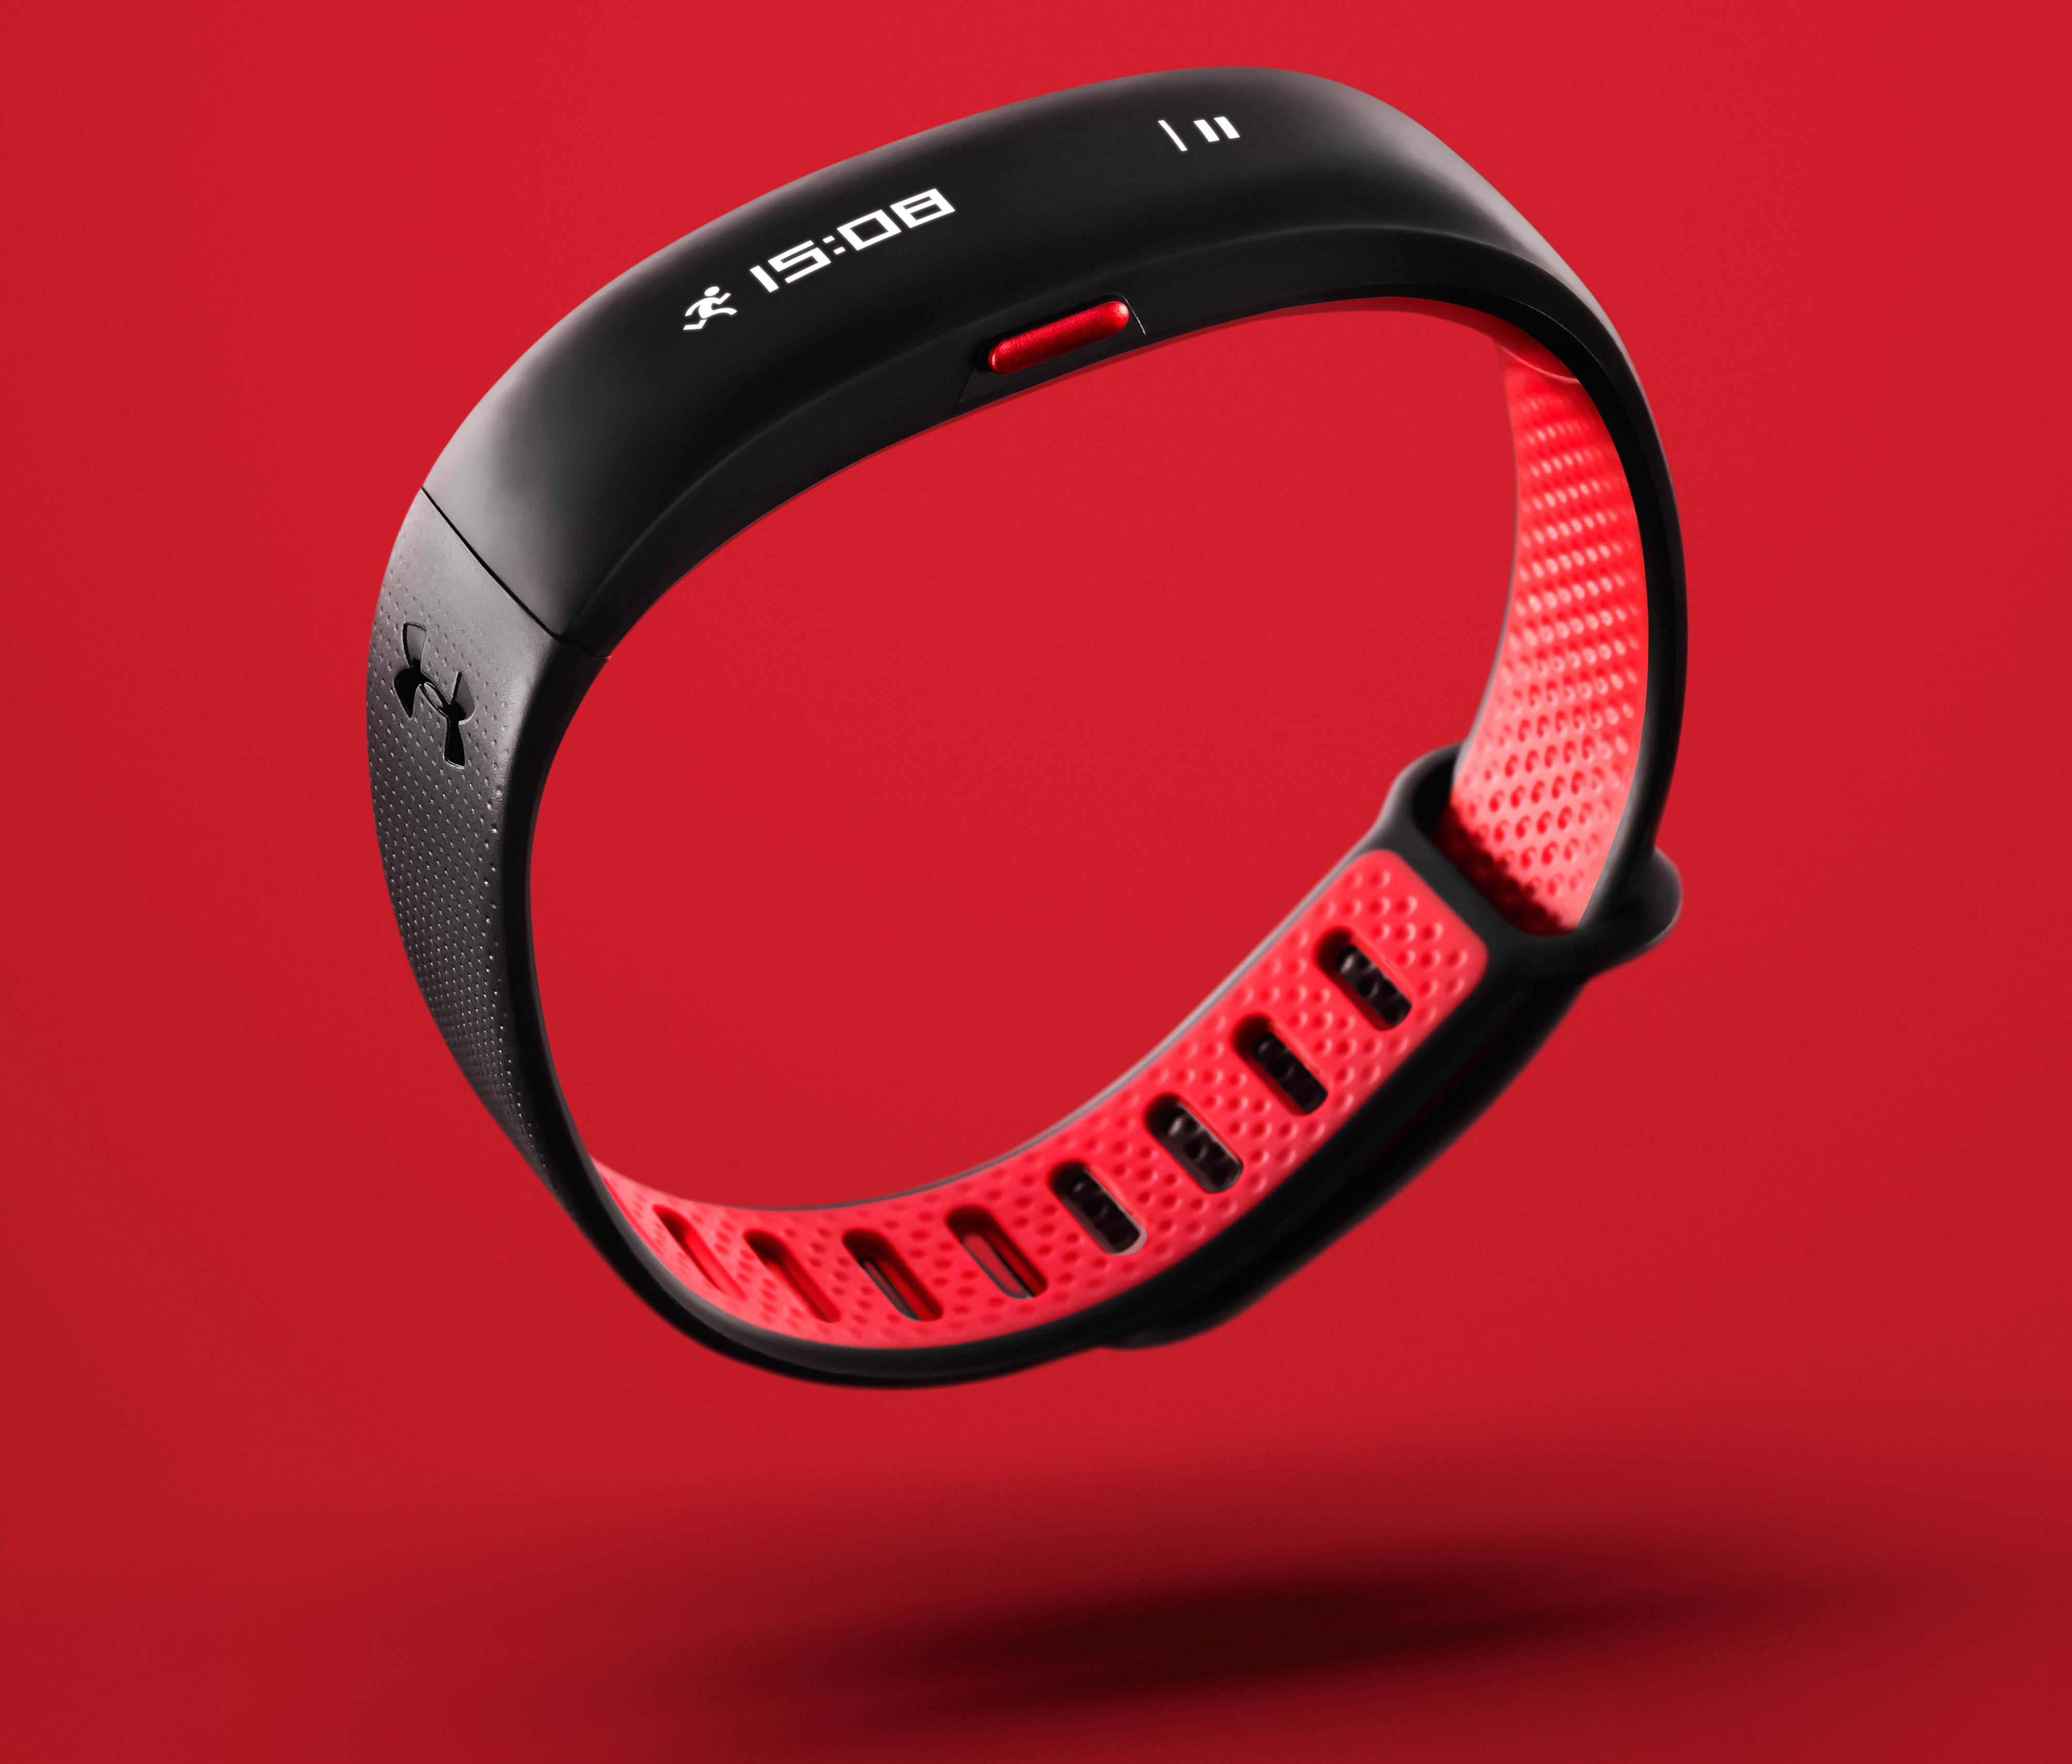 under armour band